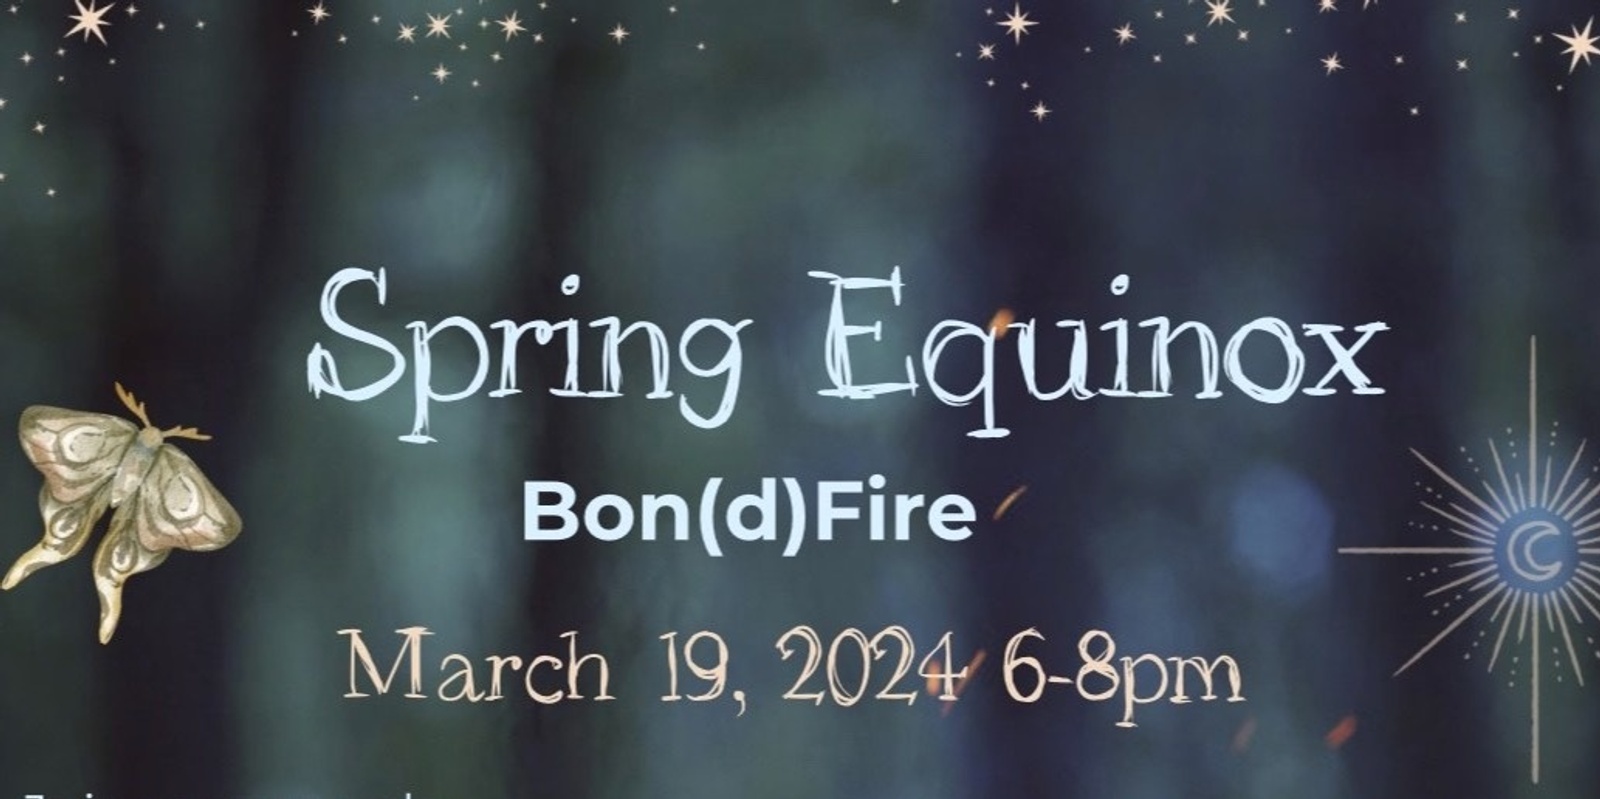 Banner image for Welcome Spring Equinox Bon{d}fire